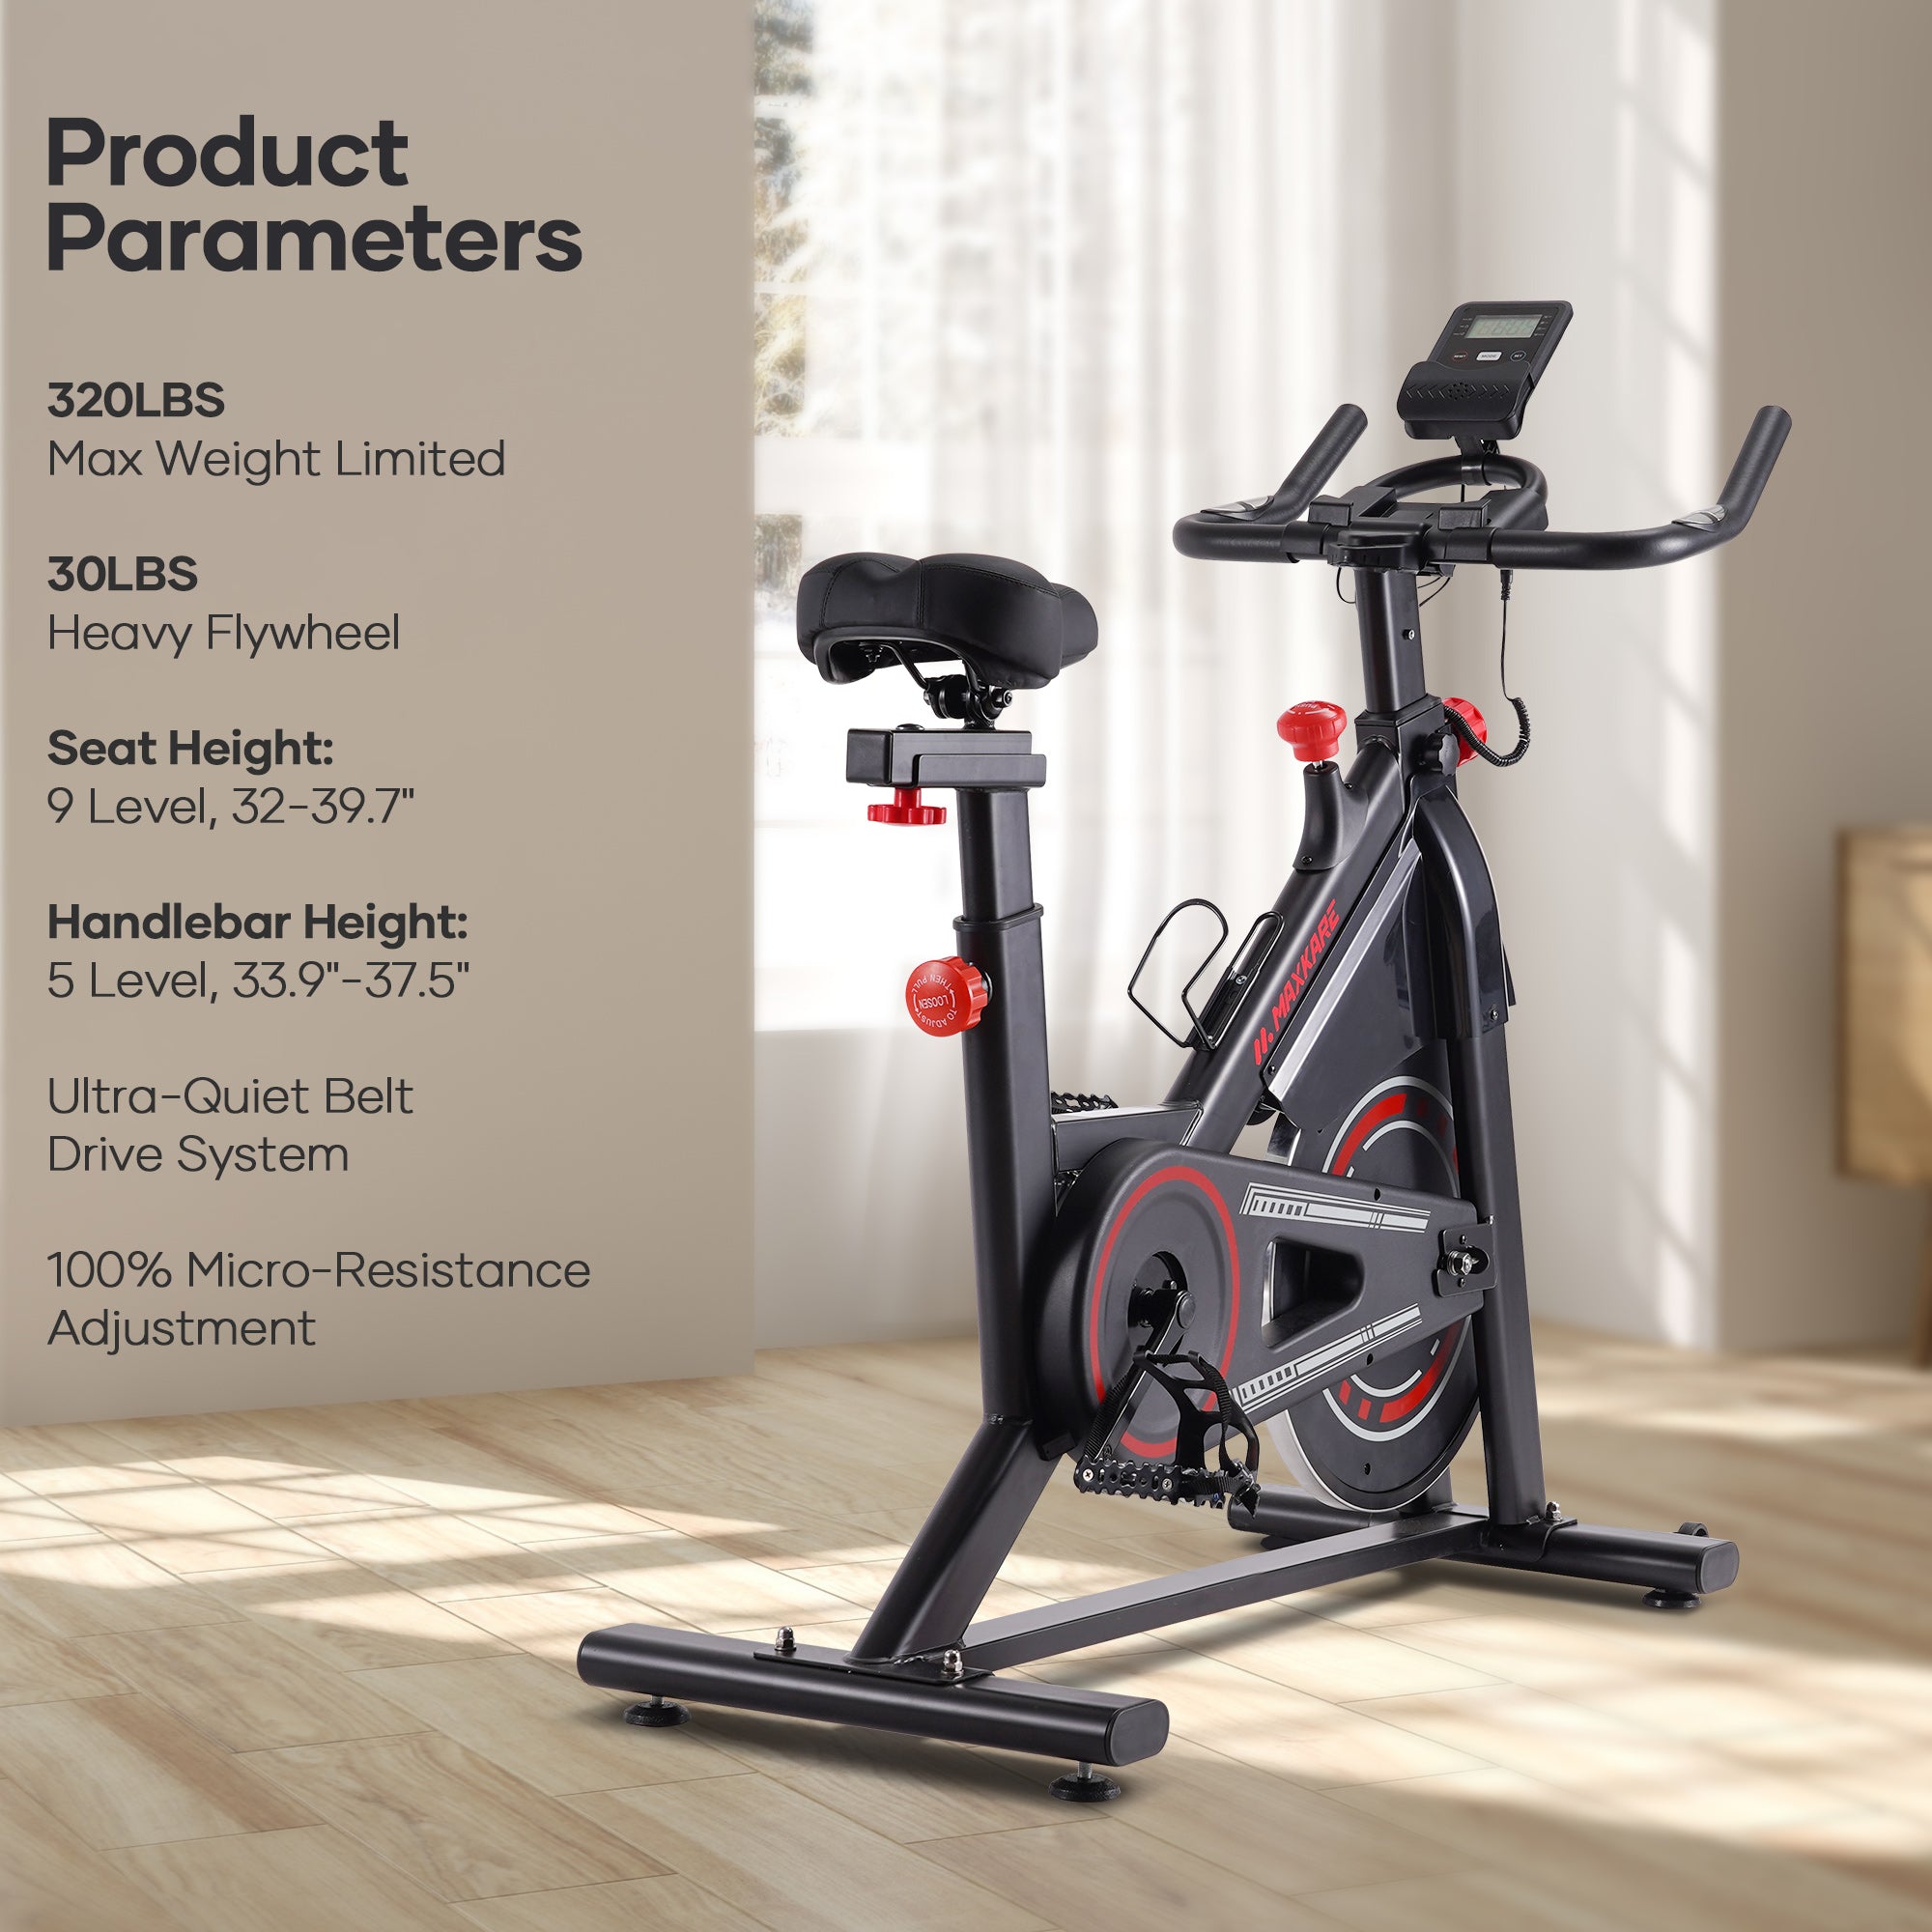 Load image into Gallery viewer, MaxKare Exercise Bike Indoor Cycling Bike Silent Magnetic Resistance 100 Levels, 30Lbs Heavy Flywheel, Max Weight 320Lbs
